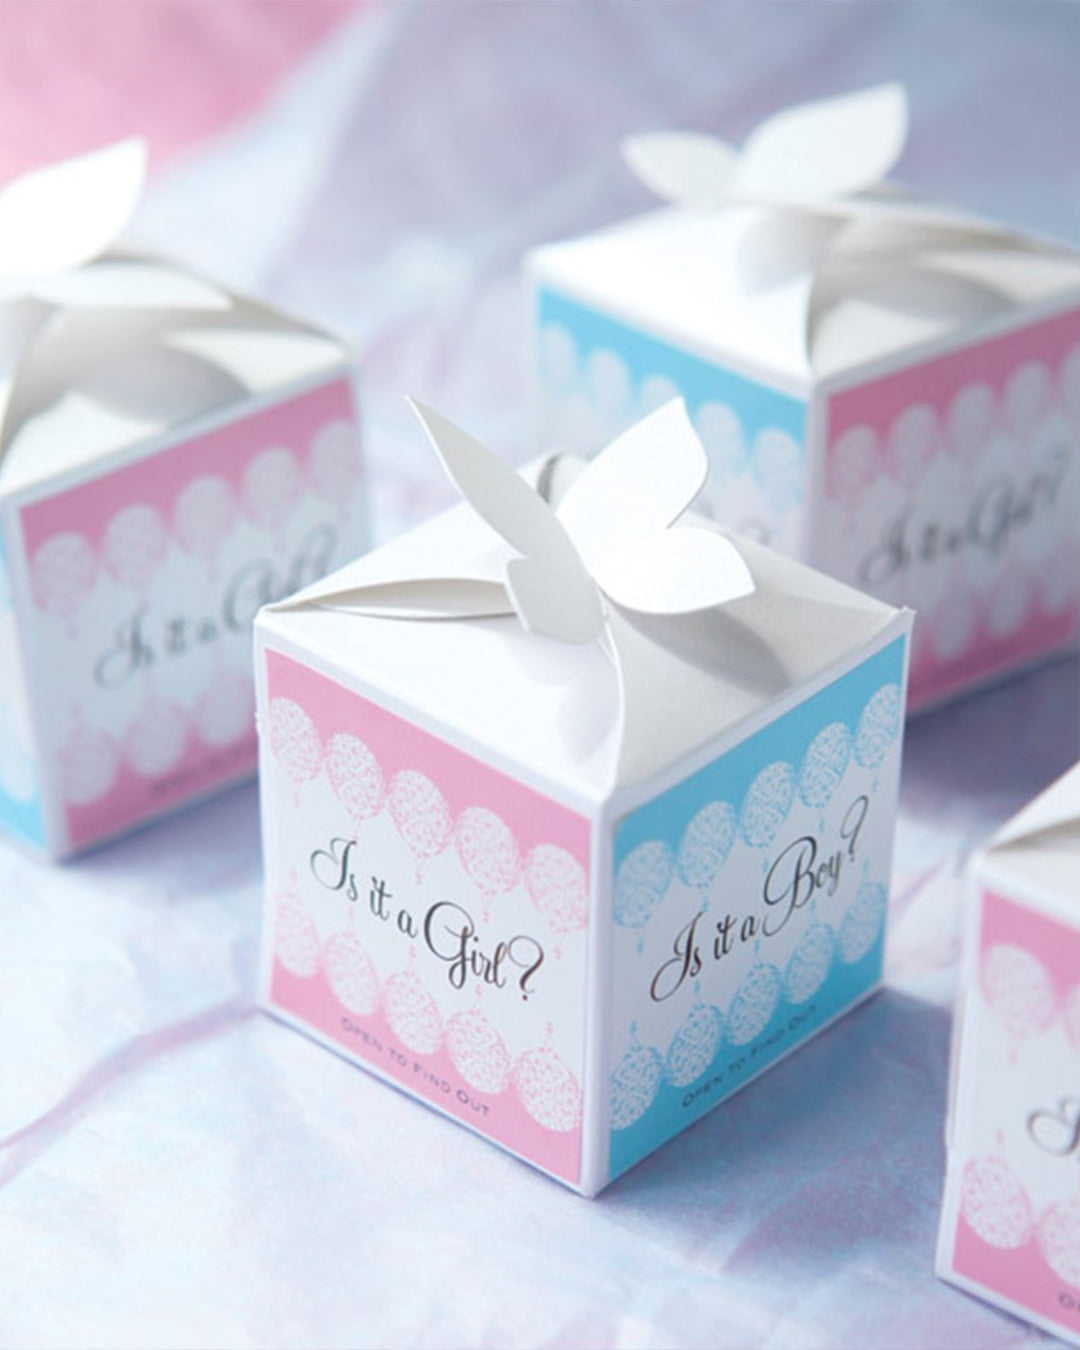 Gender reveal party gifts